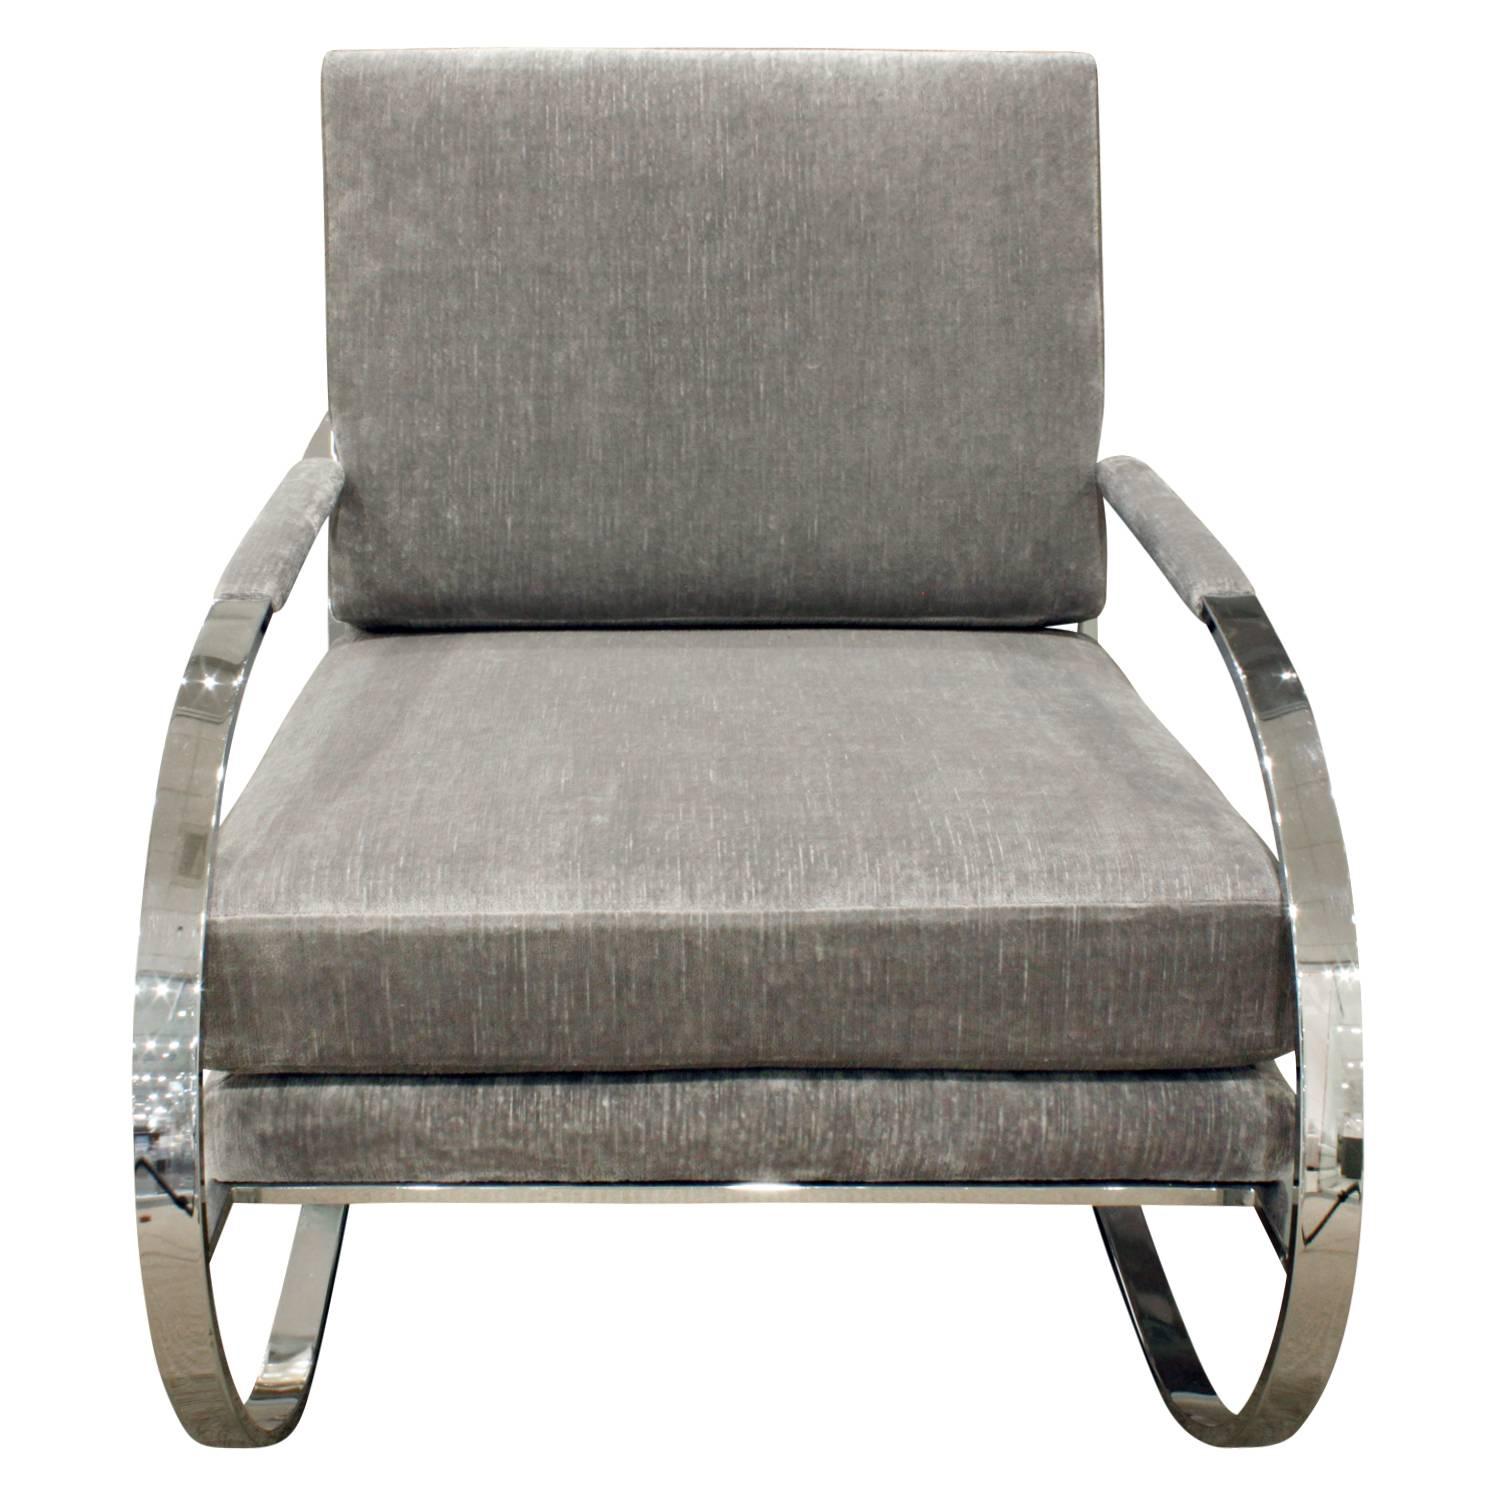 Cantilevered lounge chair with frame in flat banded chrome by Milo Baughman for Thayer Coggin, American, 1970s. Newly upholstered in gray velvet by Lobel Modern.